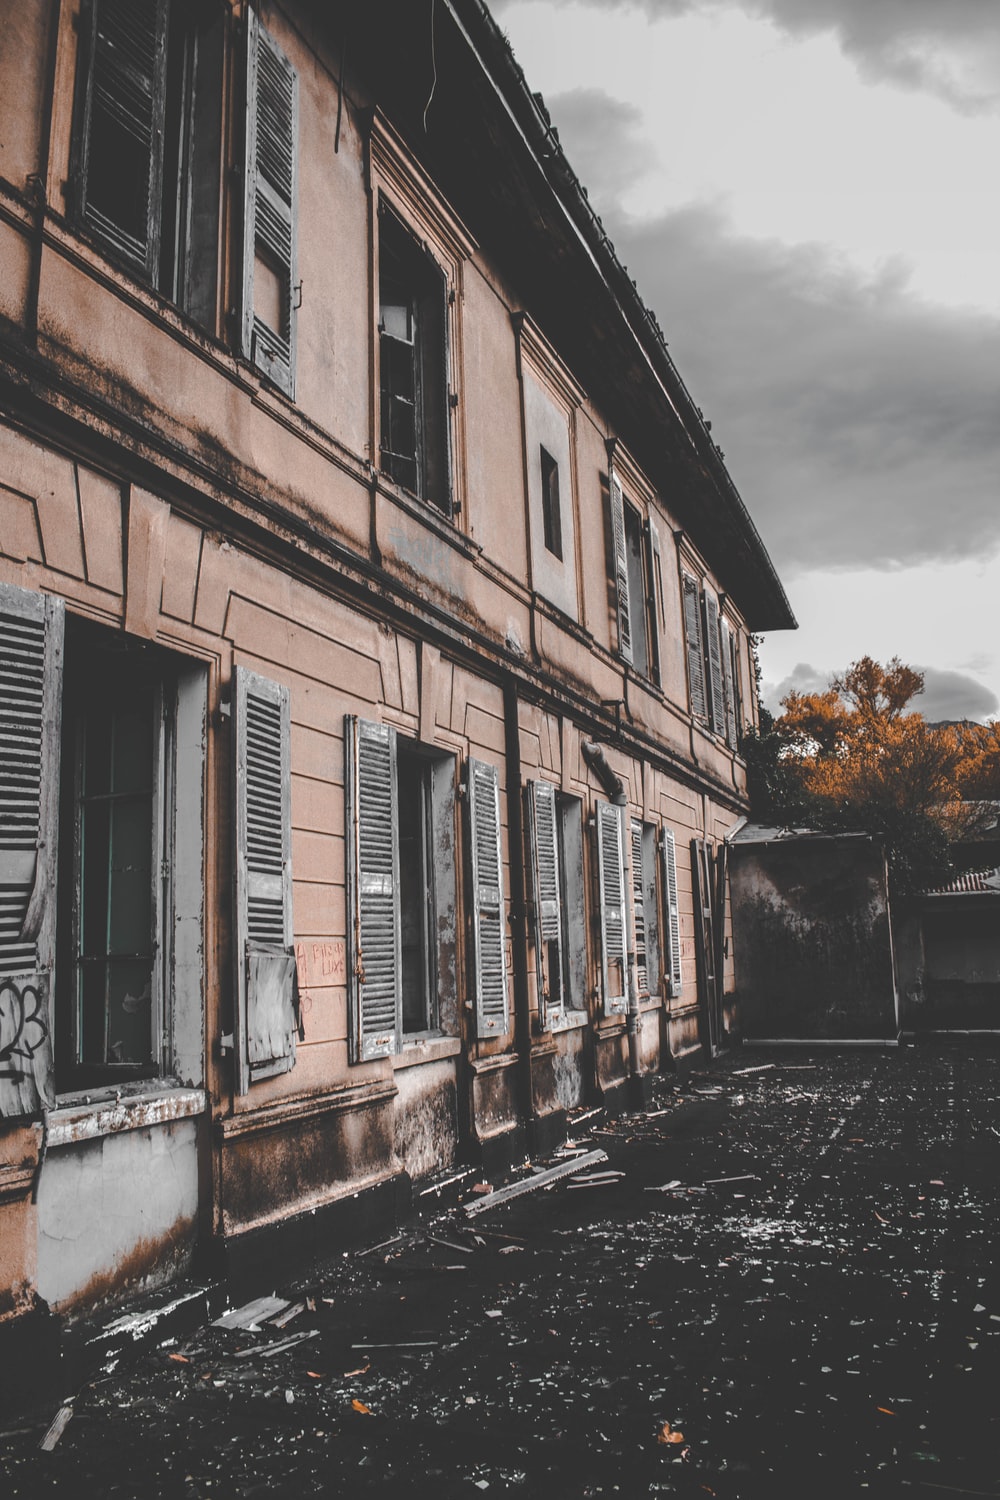 Abandoned Houses Picture. Download Free Image